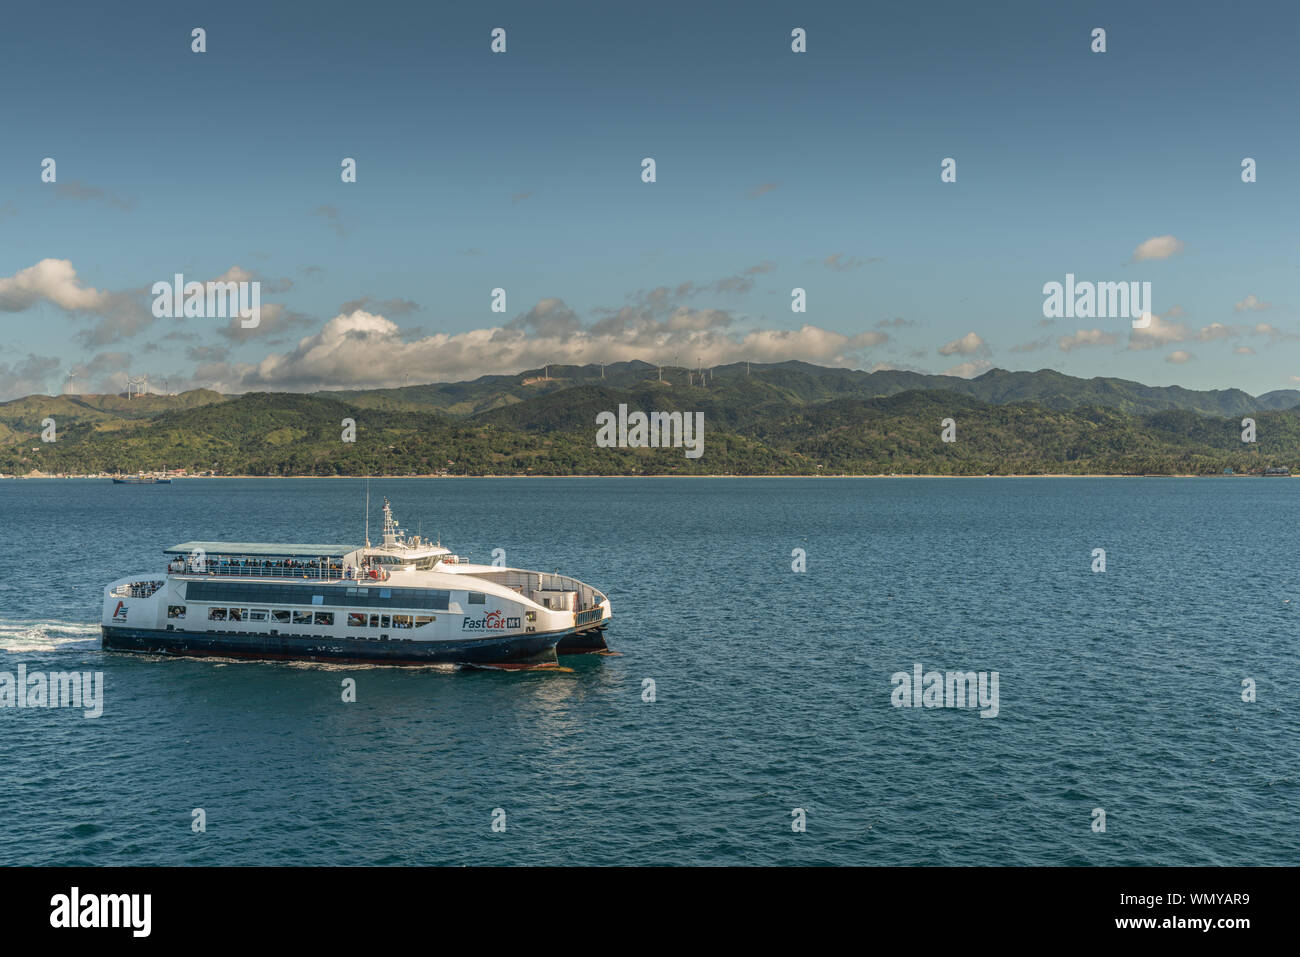 Manoc-Manoc, Boracay, Philippines - March 4, 2019: White and blue Fast Cat motorized modern long distance ferry sails on sea under blue sky. Mountains Stock Photo